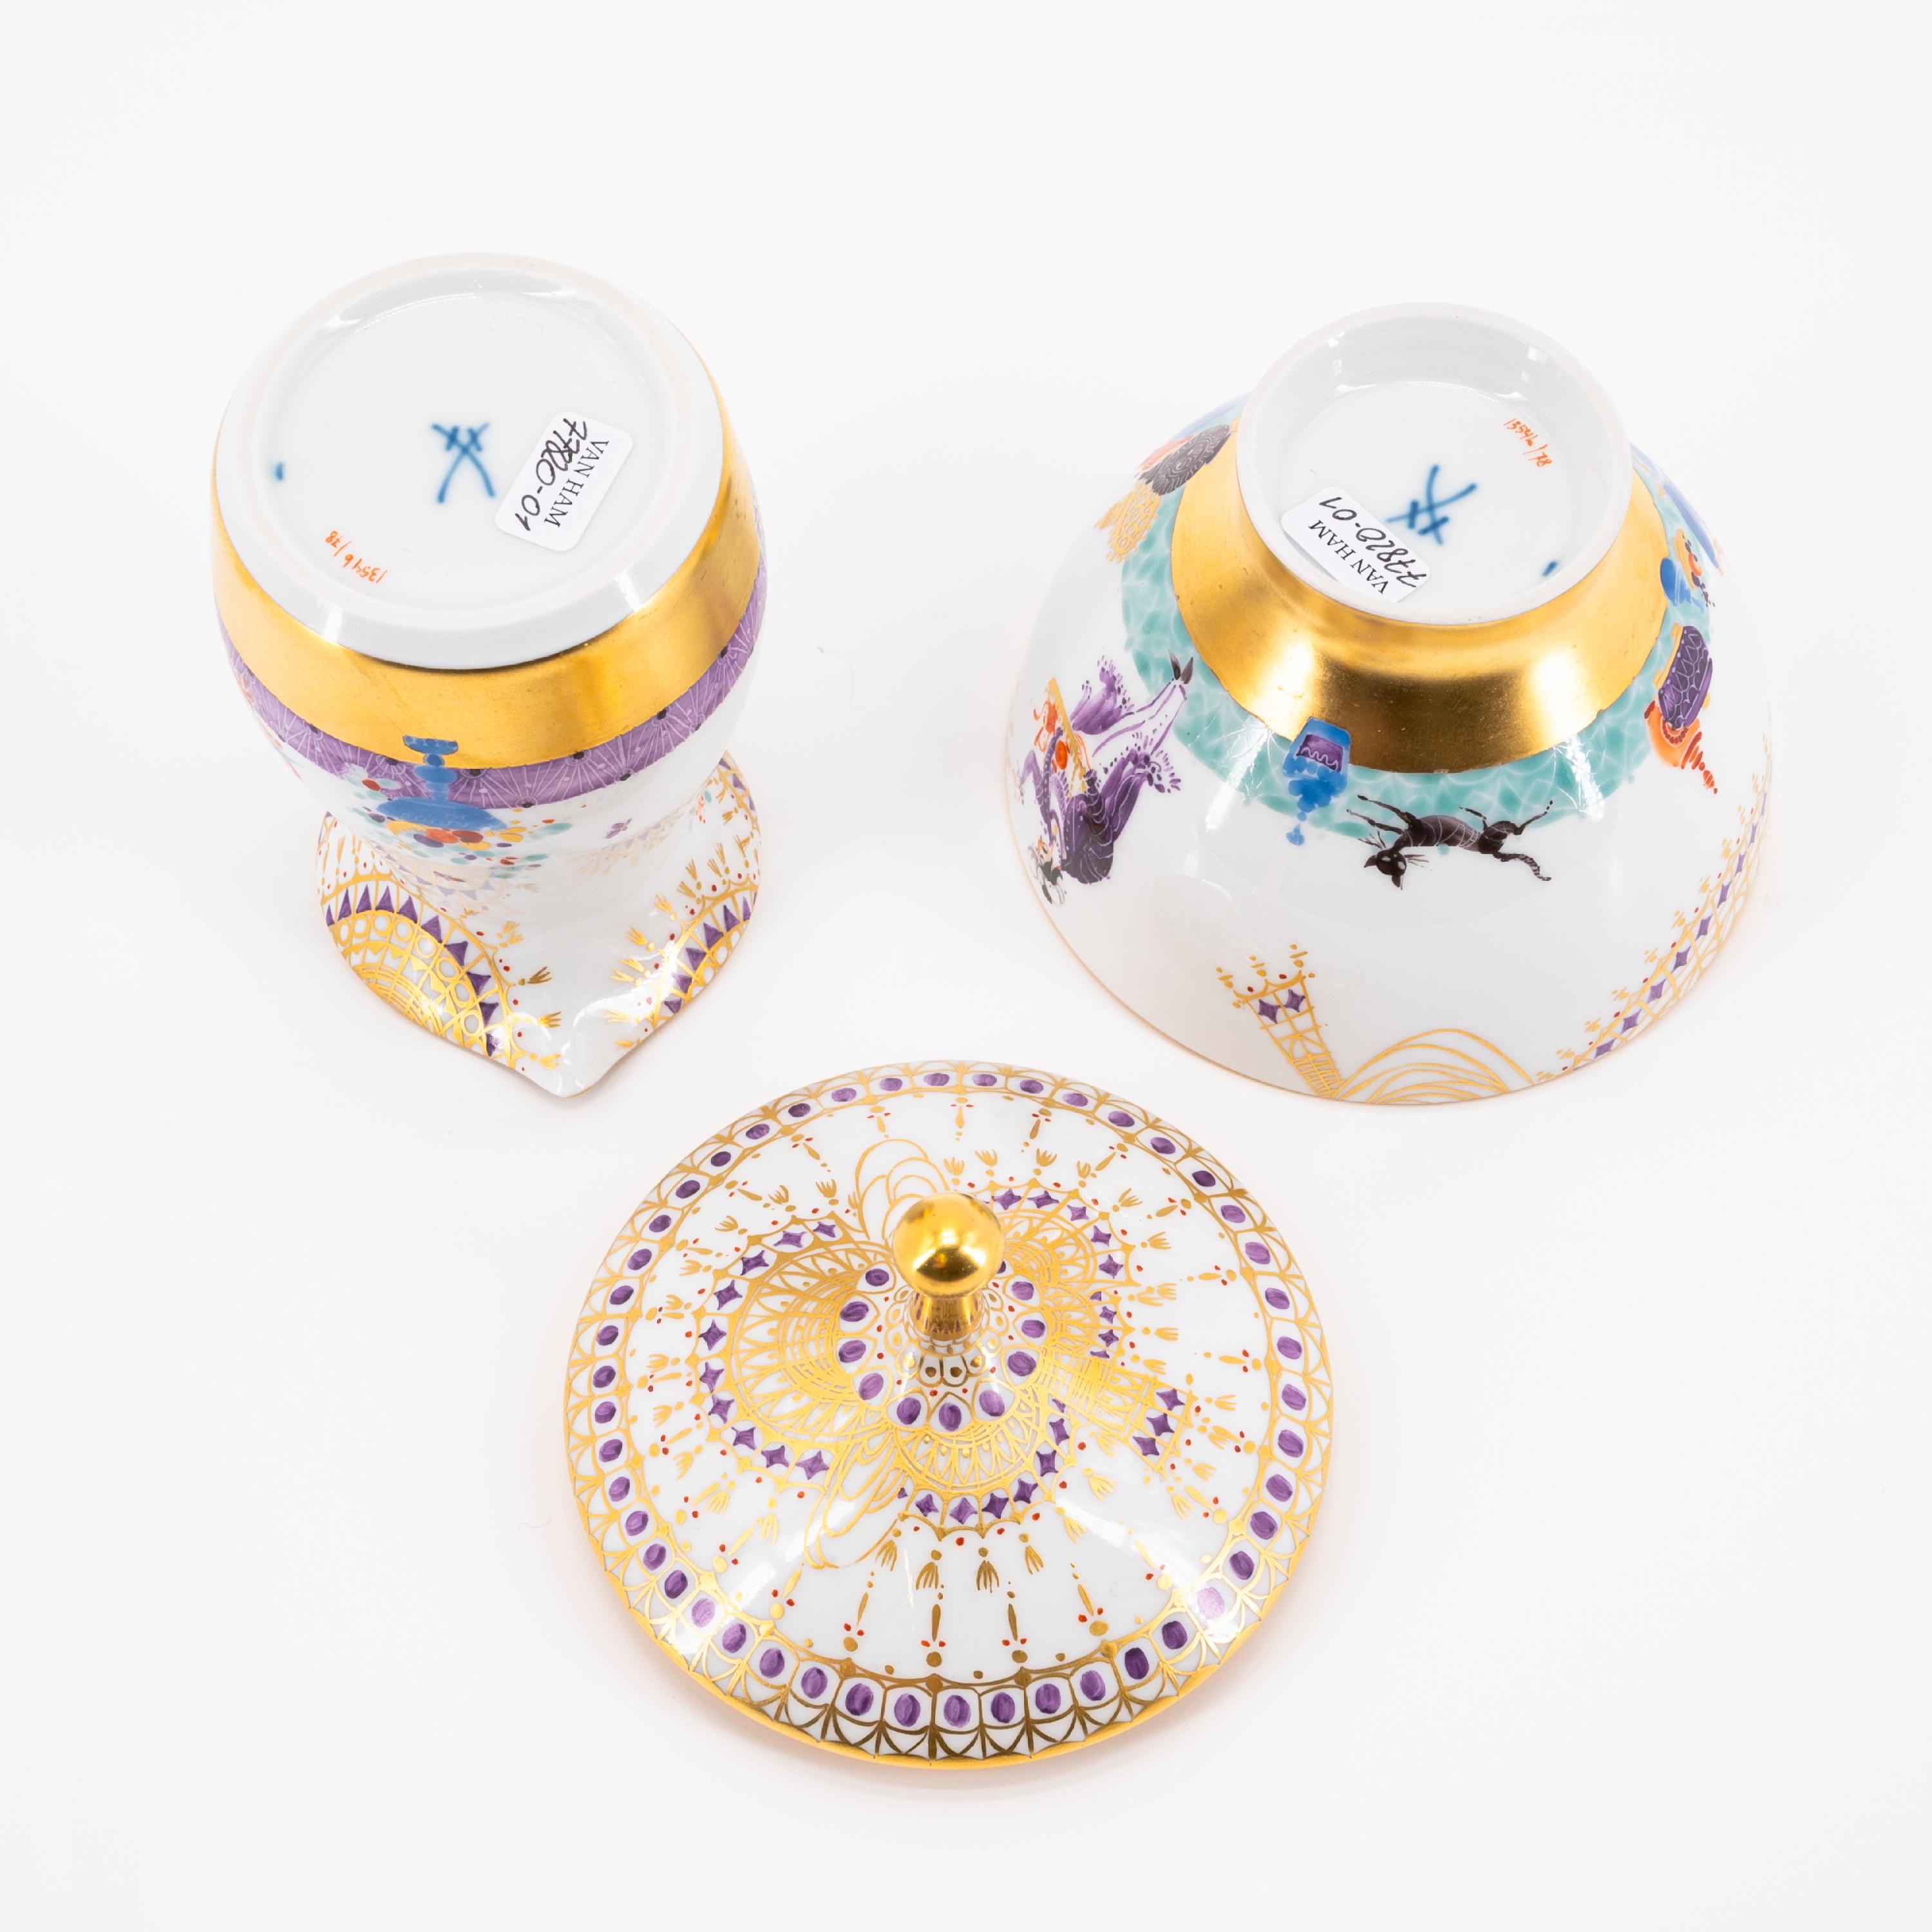 PORCELAIN COFFEE SERVICE '1001 NIGHTS' FOR SIX PEOPLE - Image 11 of 15